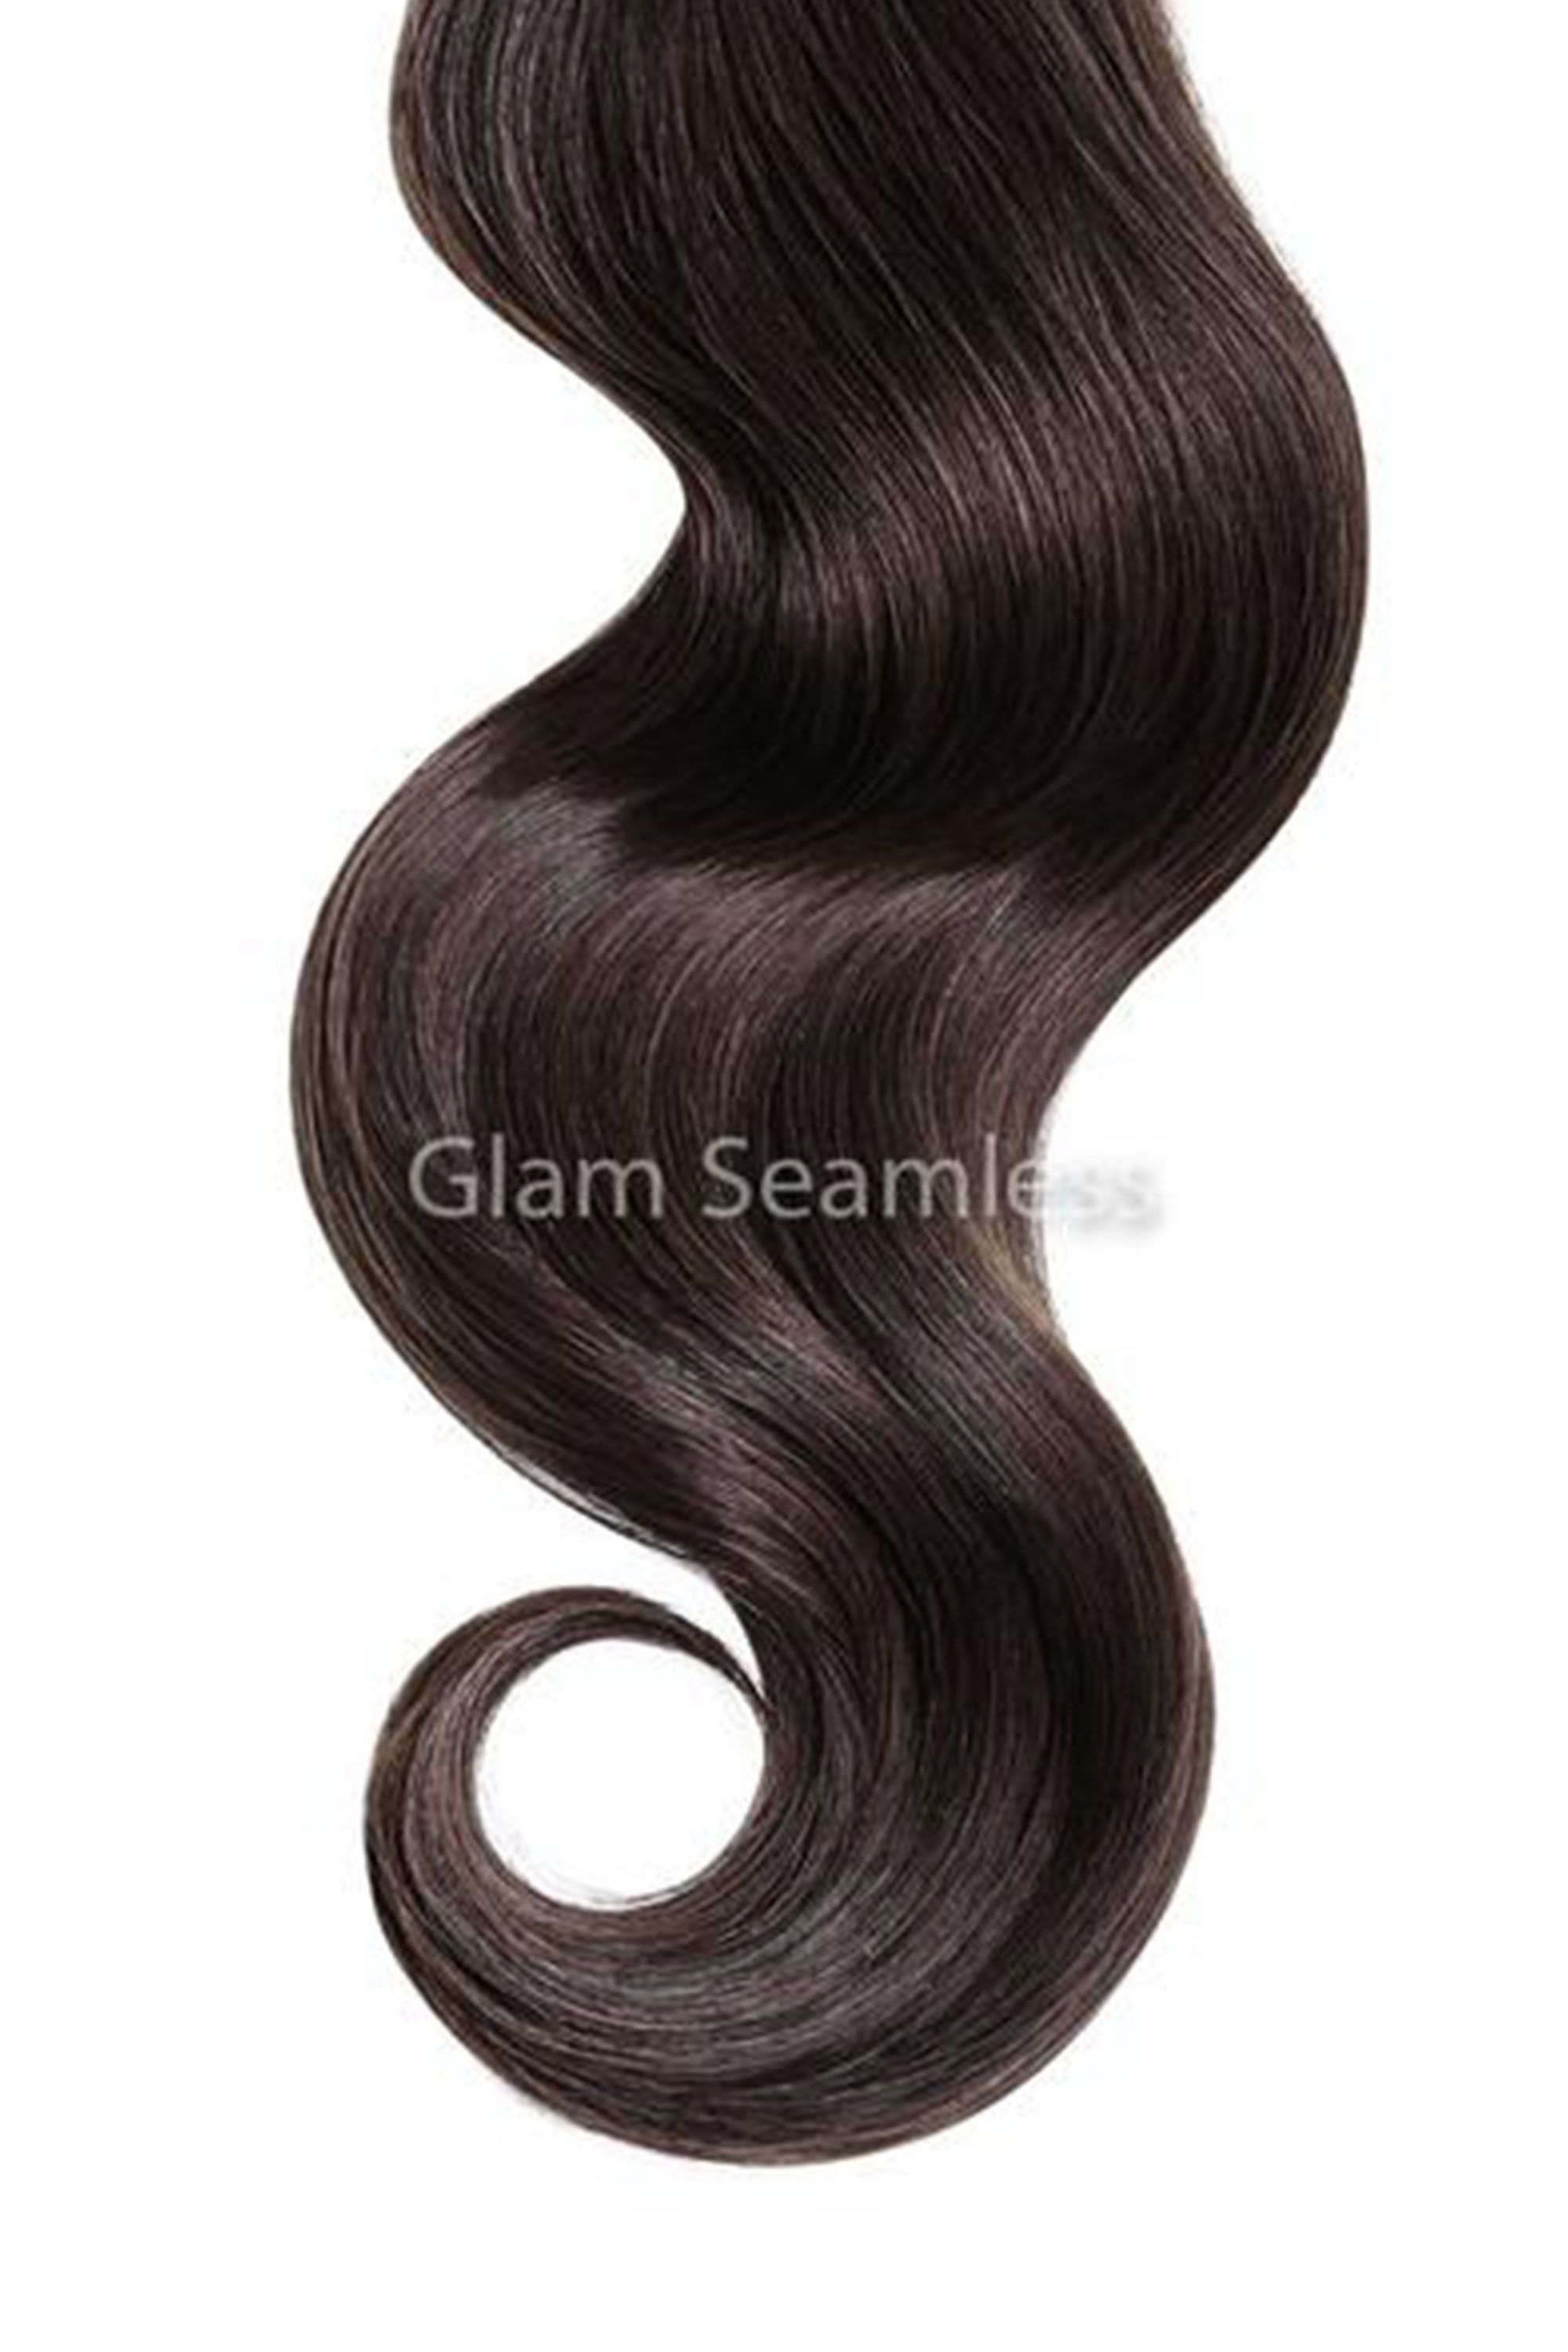 Glam Seamless Tape In Hair Extensions 